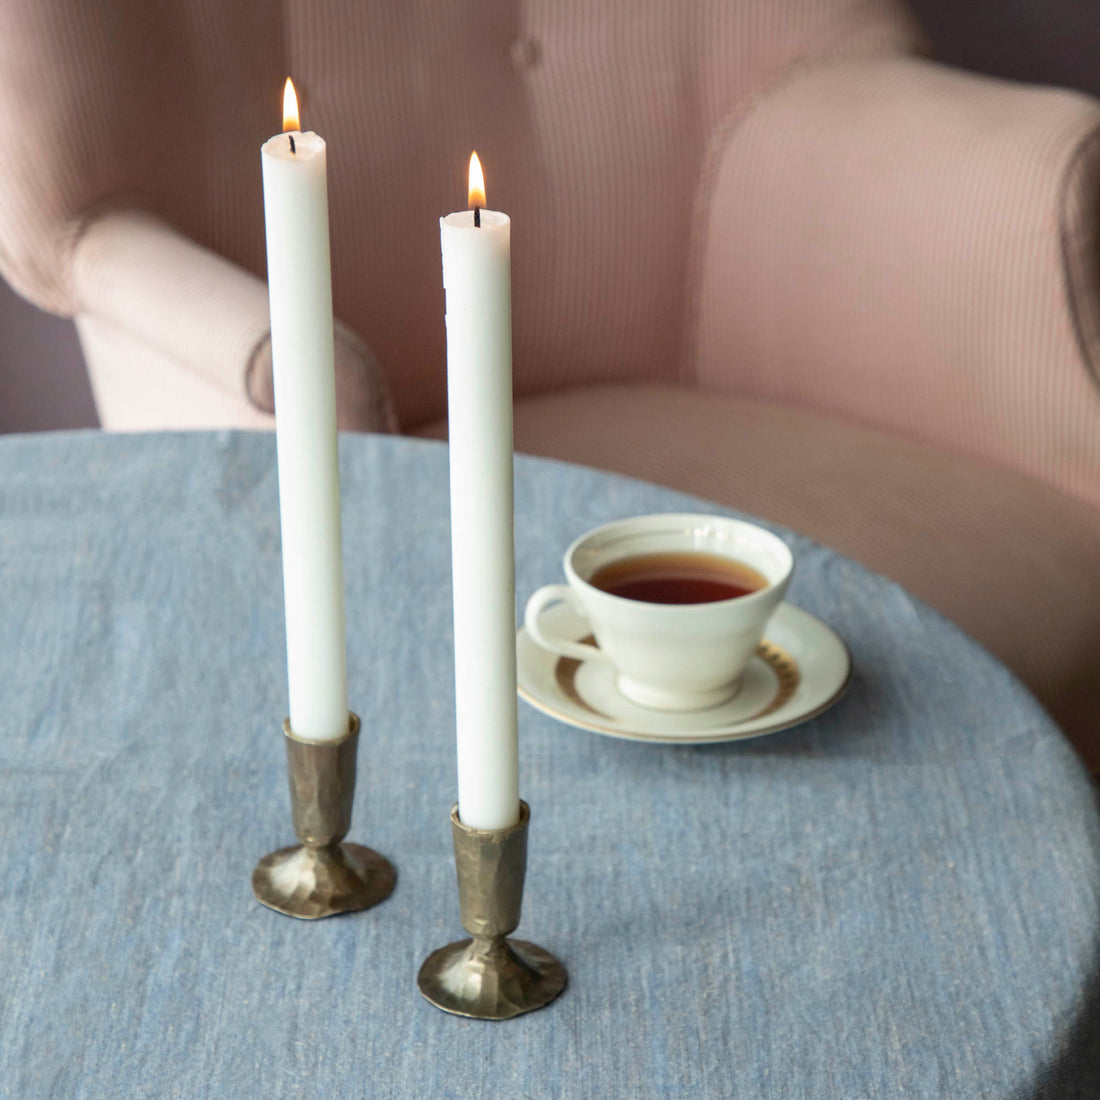 Two HomArt Iron Taper Candleholders on a table next to a cup of tea.